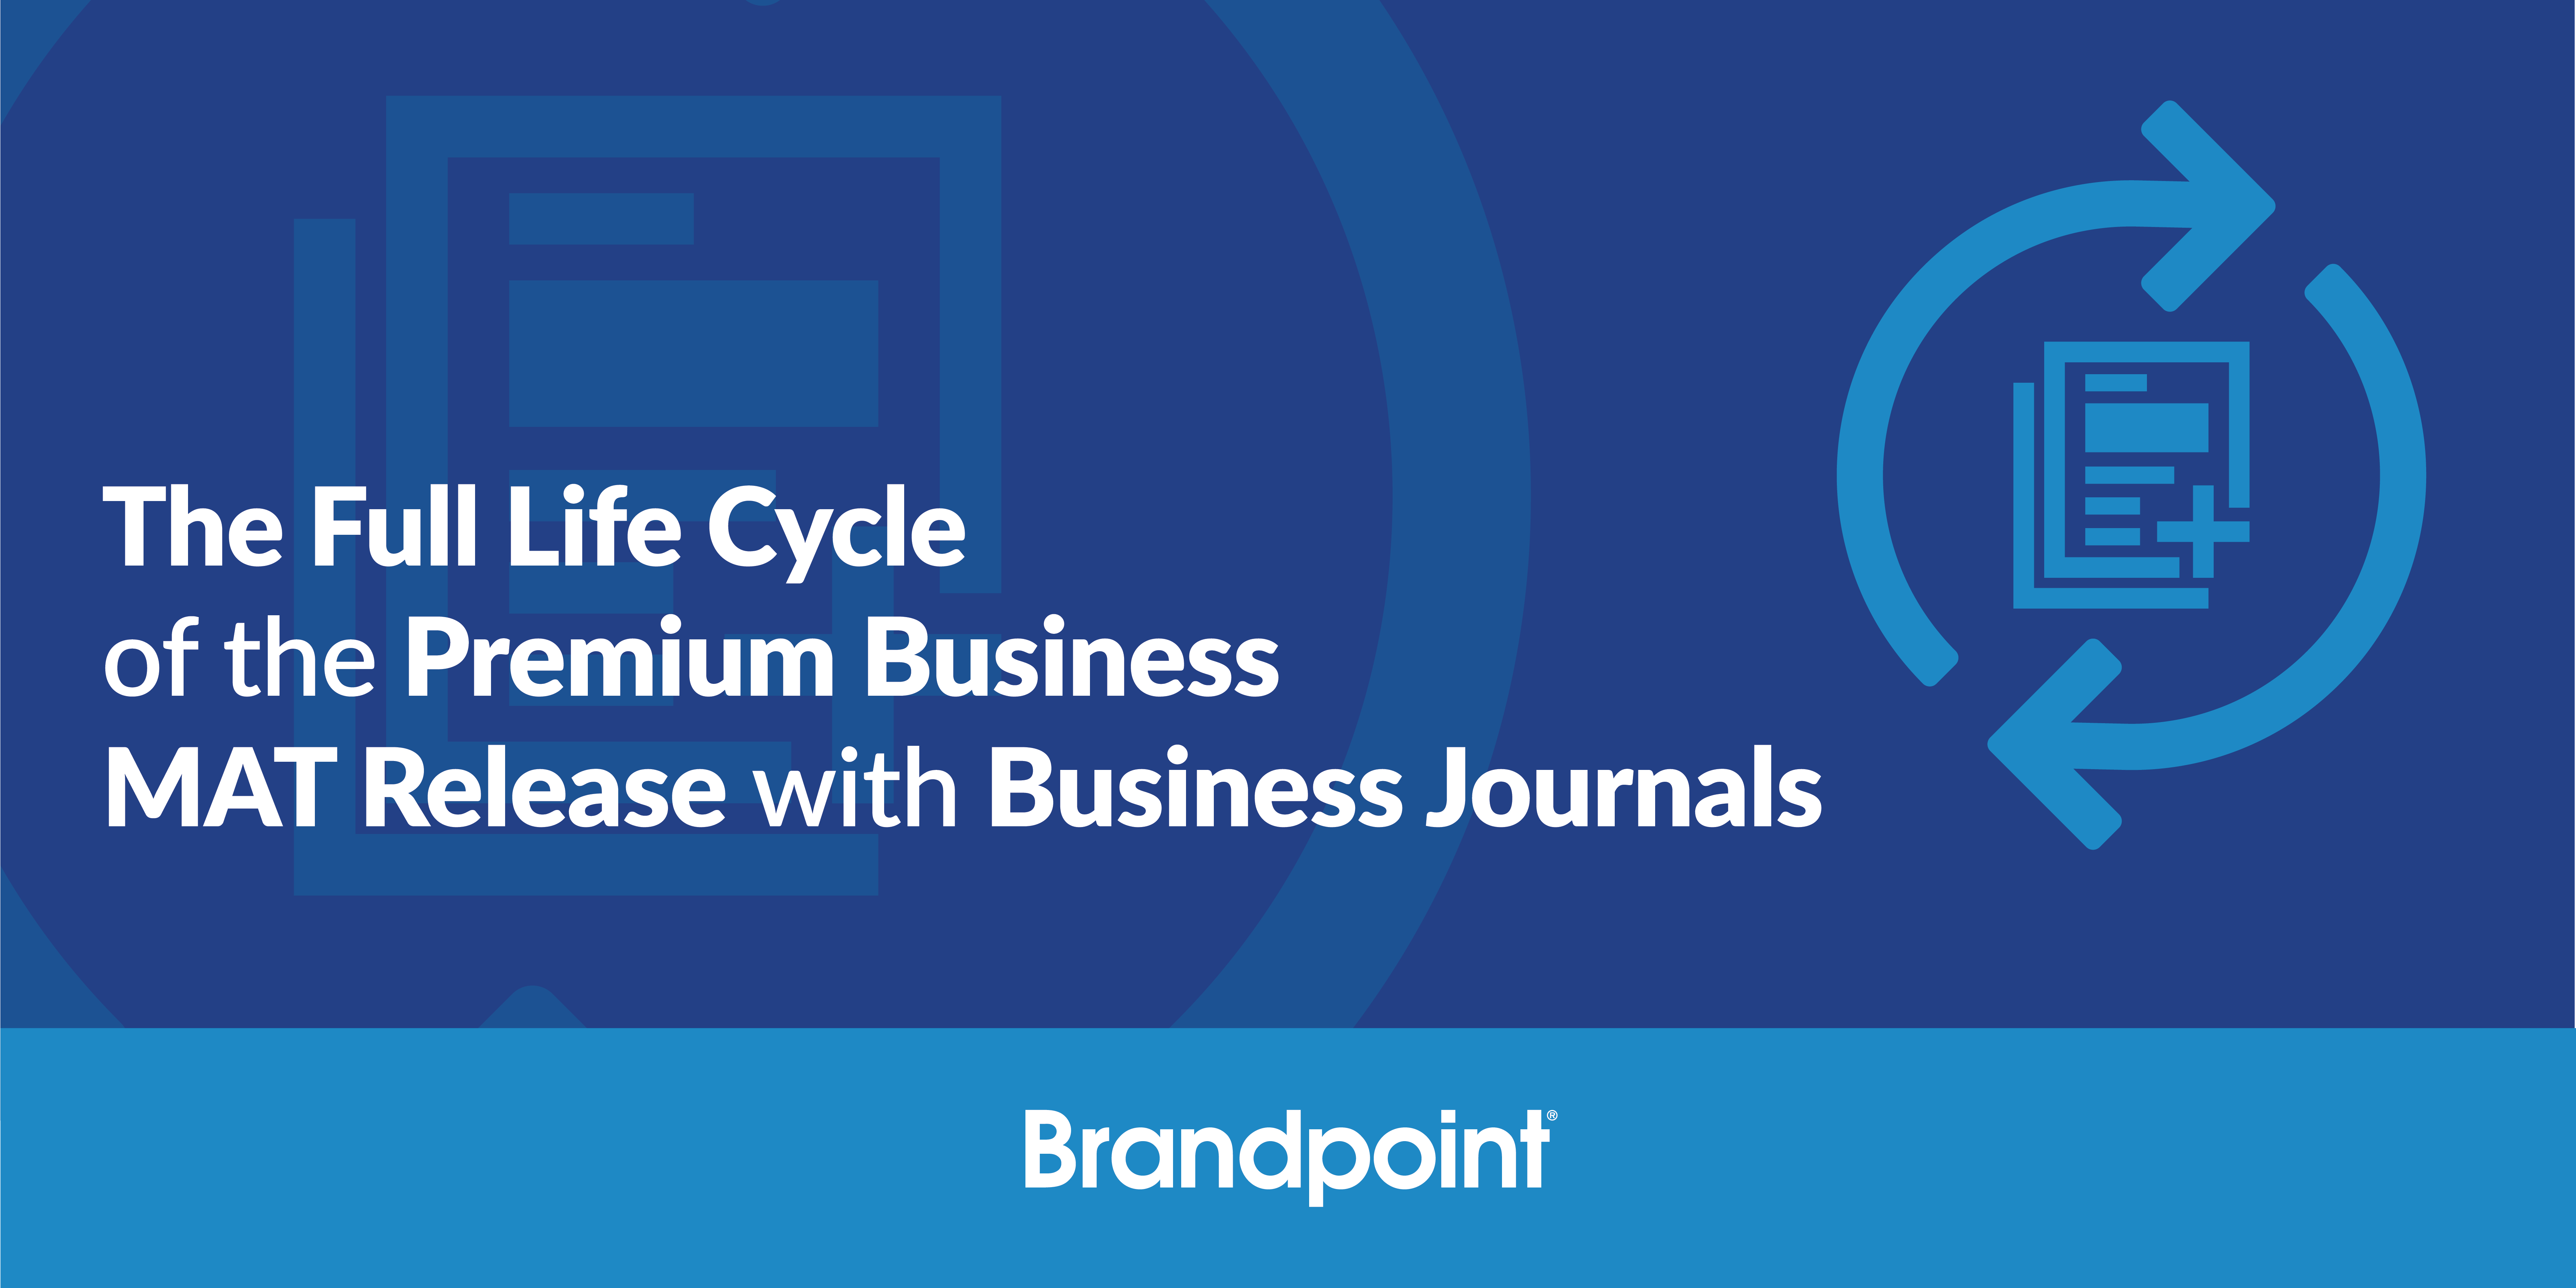 The full life cycle of premium business MAT release with Business Journals